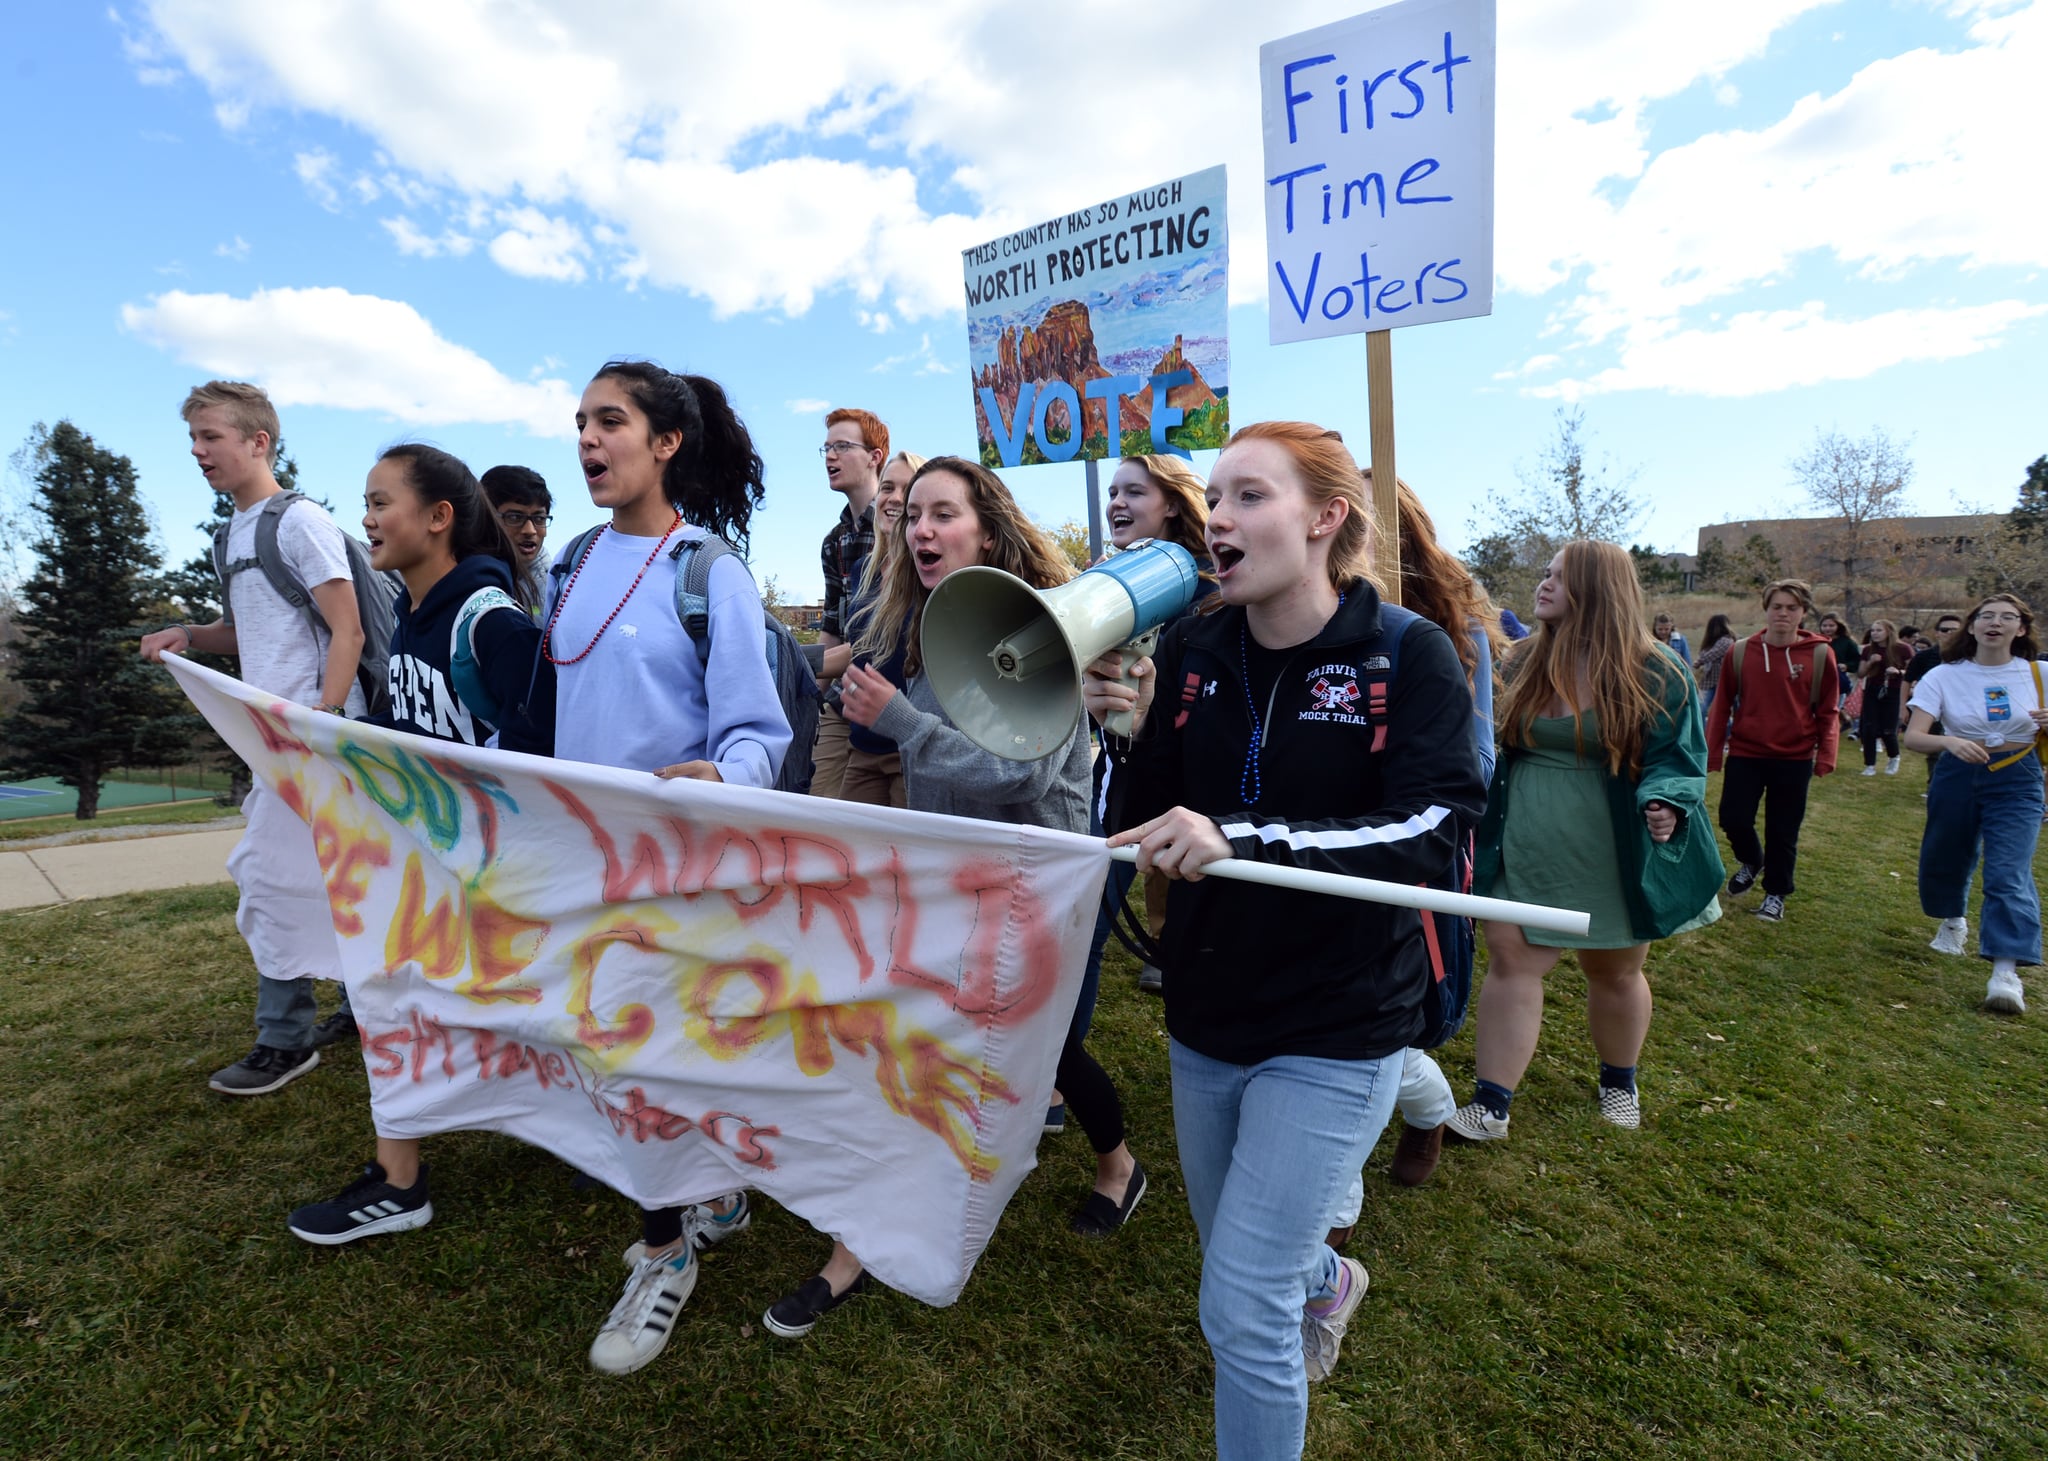 BOULDER, CO - October 25, 2018:  Owen Hushka, left, and Vanessa Haggans, hold a banner while marching, with other students and staff of Fairview High School, to the South Boulder Recreation Centre to vote and turn in election ballots in early voting in Boulder, Colourado on Thursday October 25, 2018. 